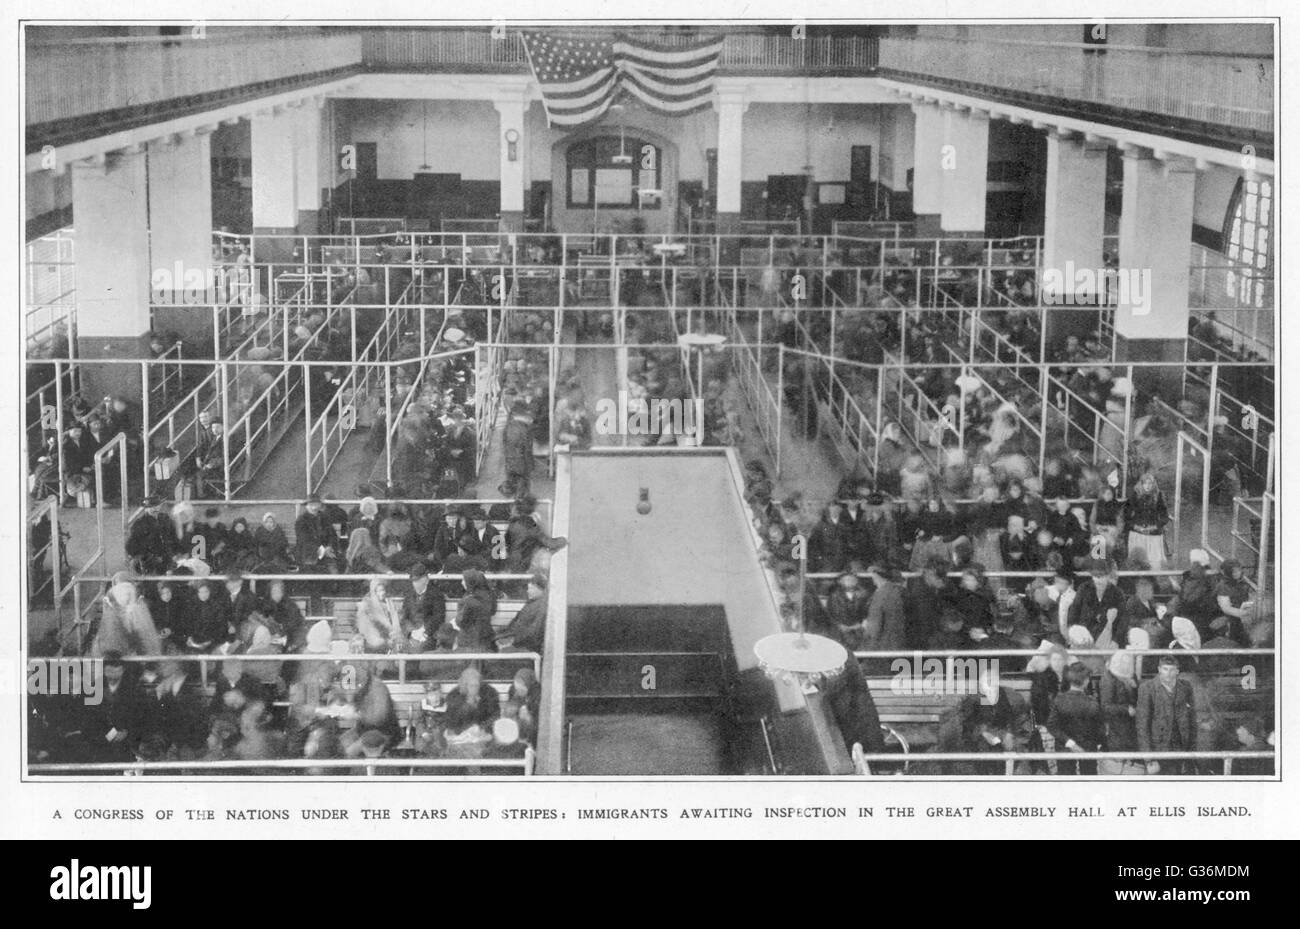 Immigrants waiting inspection in the Great Assembly Hall at  Ellis Island, New York        Date: 1911 Stock Photo